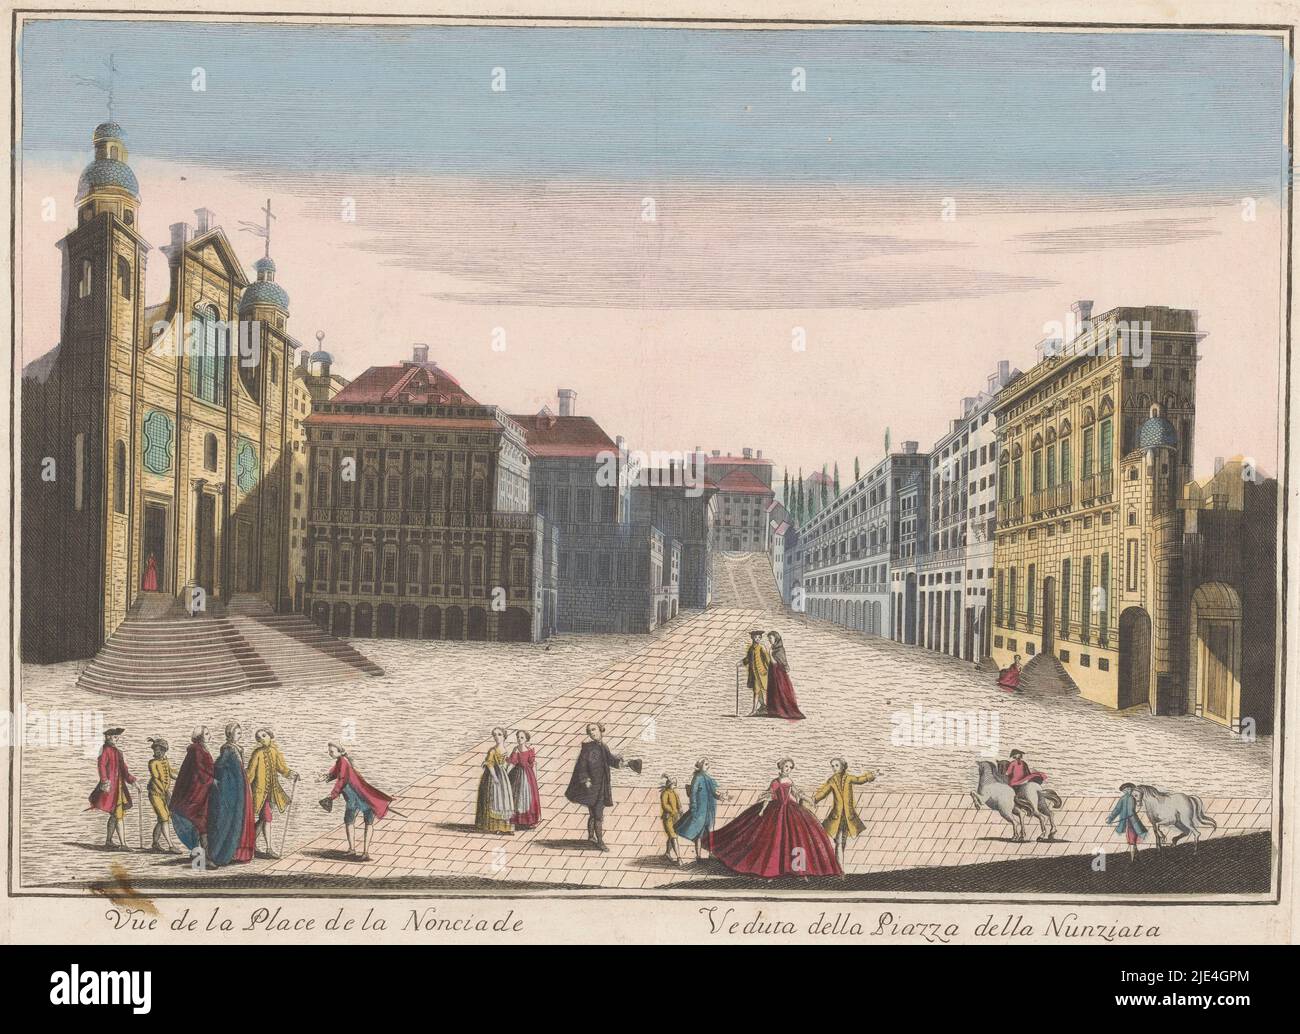 View of the Piazza della Nunziata at Genoa, Remondini family (attributed to), 1700 - 1799, On the left the basilica Santissima Annunziata del Vastato. Numbered in the lower right: Gg 6., publisher: familie Remondini, (attributed to), print maker: anonymous, publisher: Bassano del Grappa, print maker: Italy, 1700 - 1799, paper, etching, brush, h 318 mm × w 424 mm Stock Photo